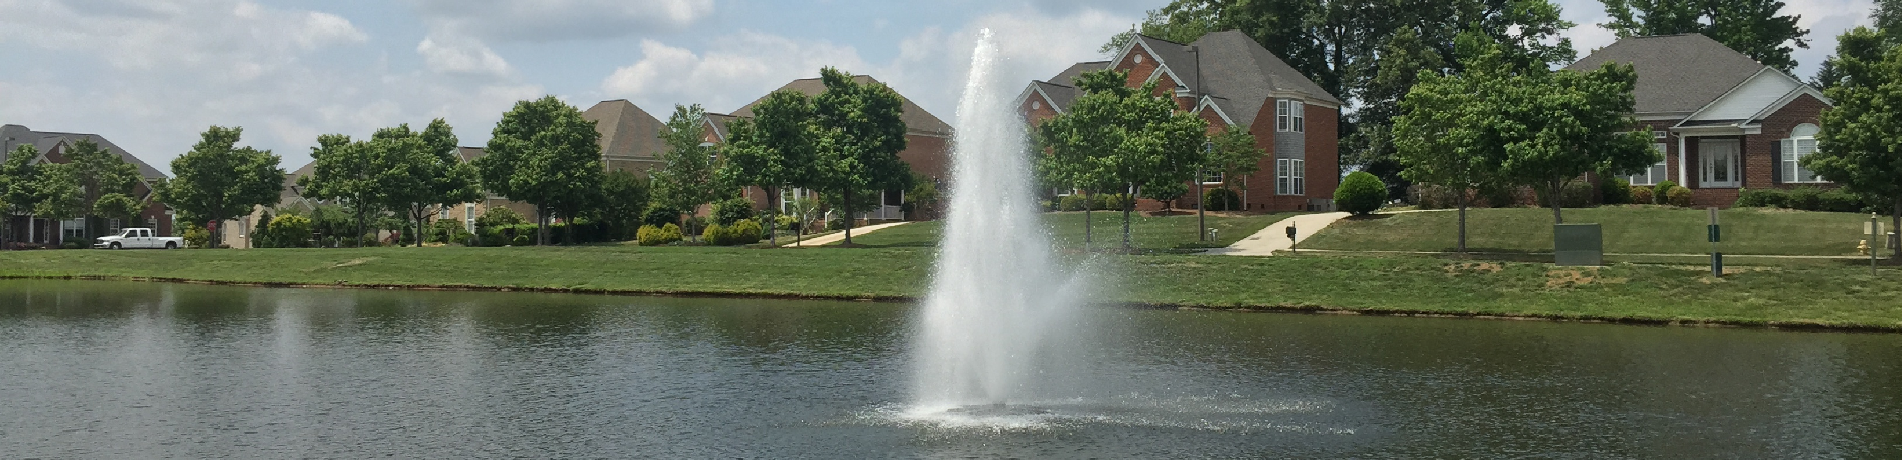 Lake Management Floating Fountains Aeration Irrigation Pump Systems Dallas Fort Worth Texas AquaMaster Fountains Master Series Dallas Fort Worth | The Lake Doctor